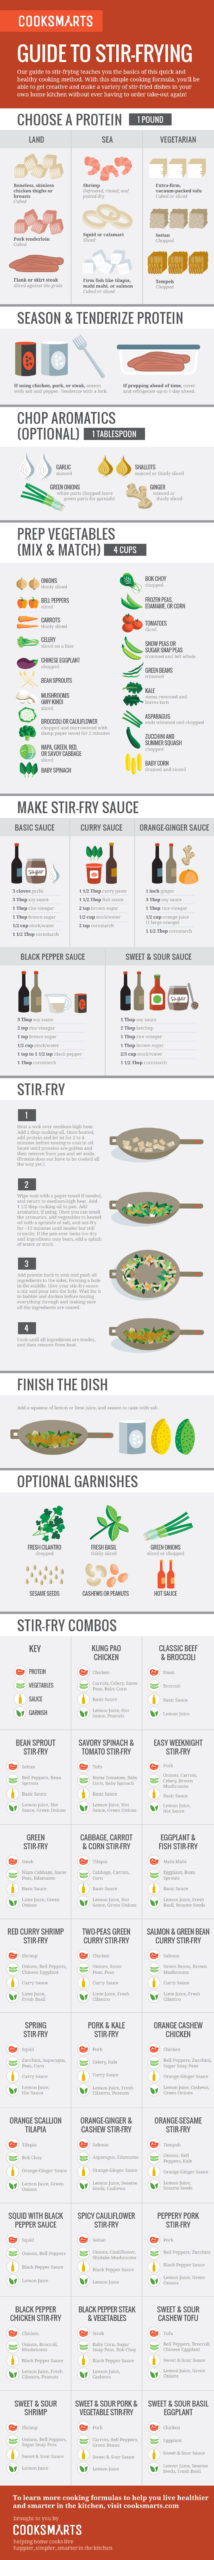 The Complete Guide To Stir-Fry Cooking [Infographic]